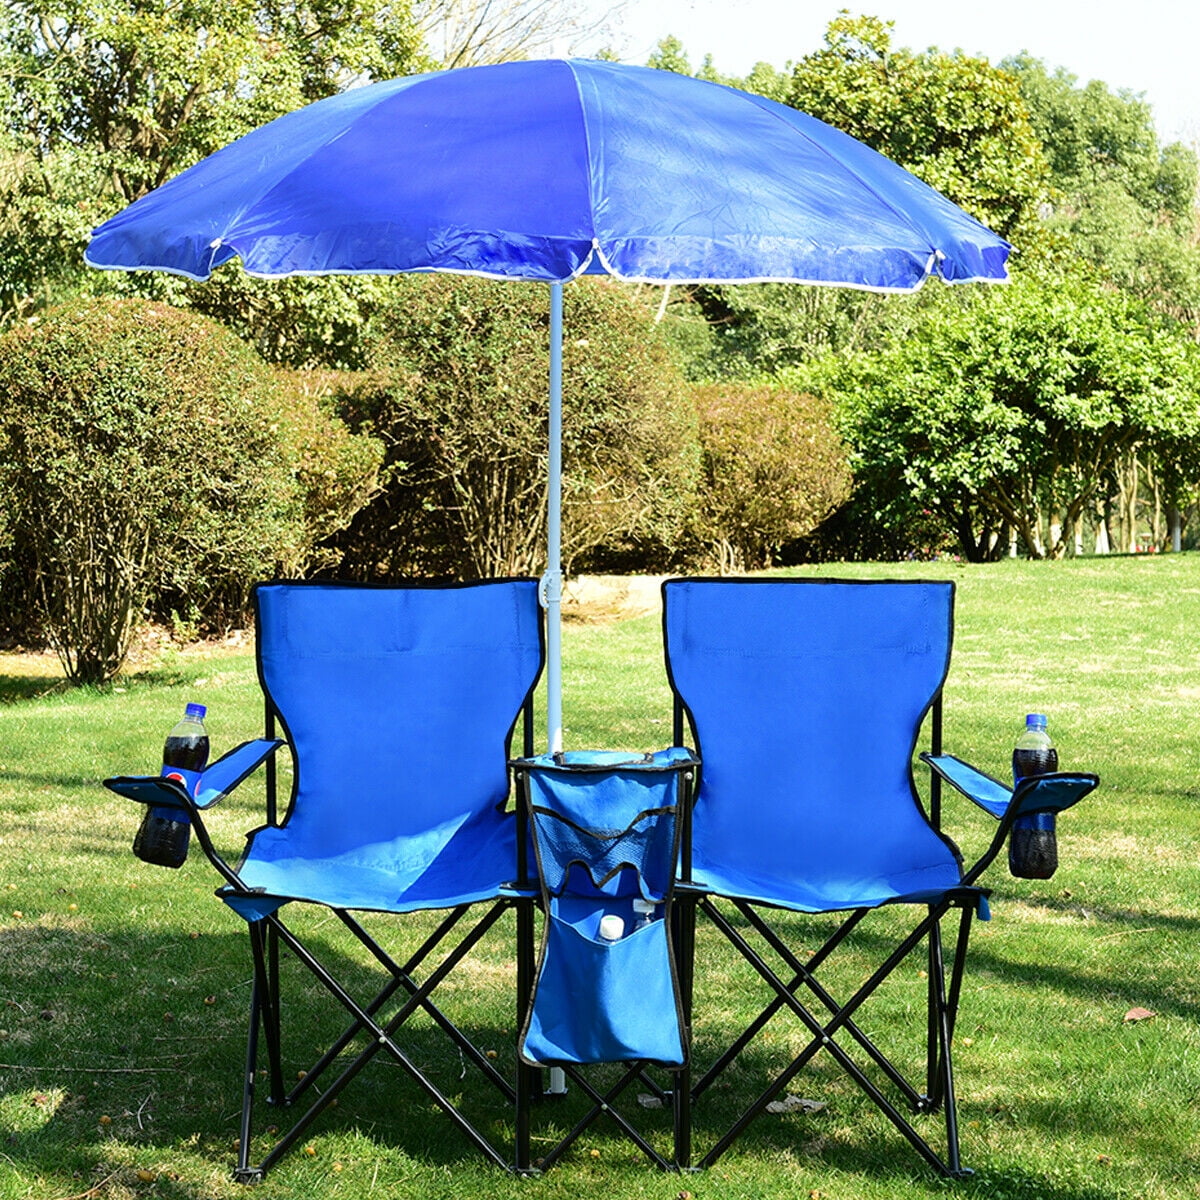 Portable Folding Chair Camping Fishing Picnic Beach BBQ Stools Blue Seat Outdoor 